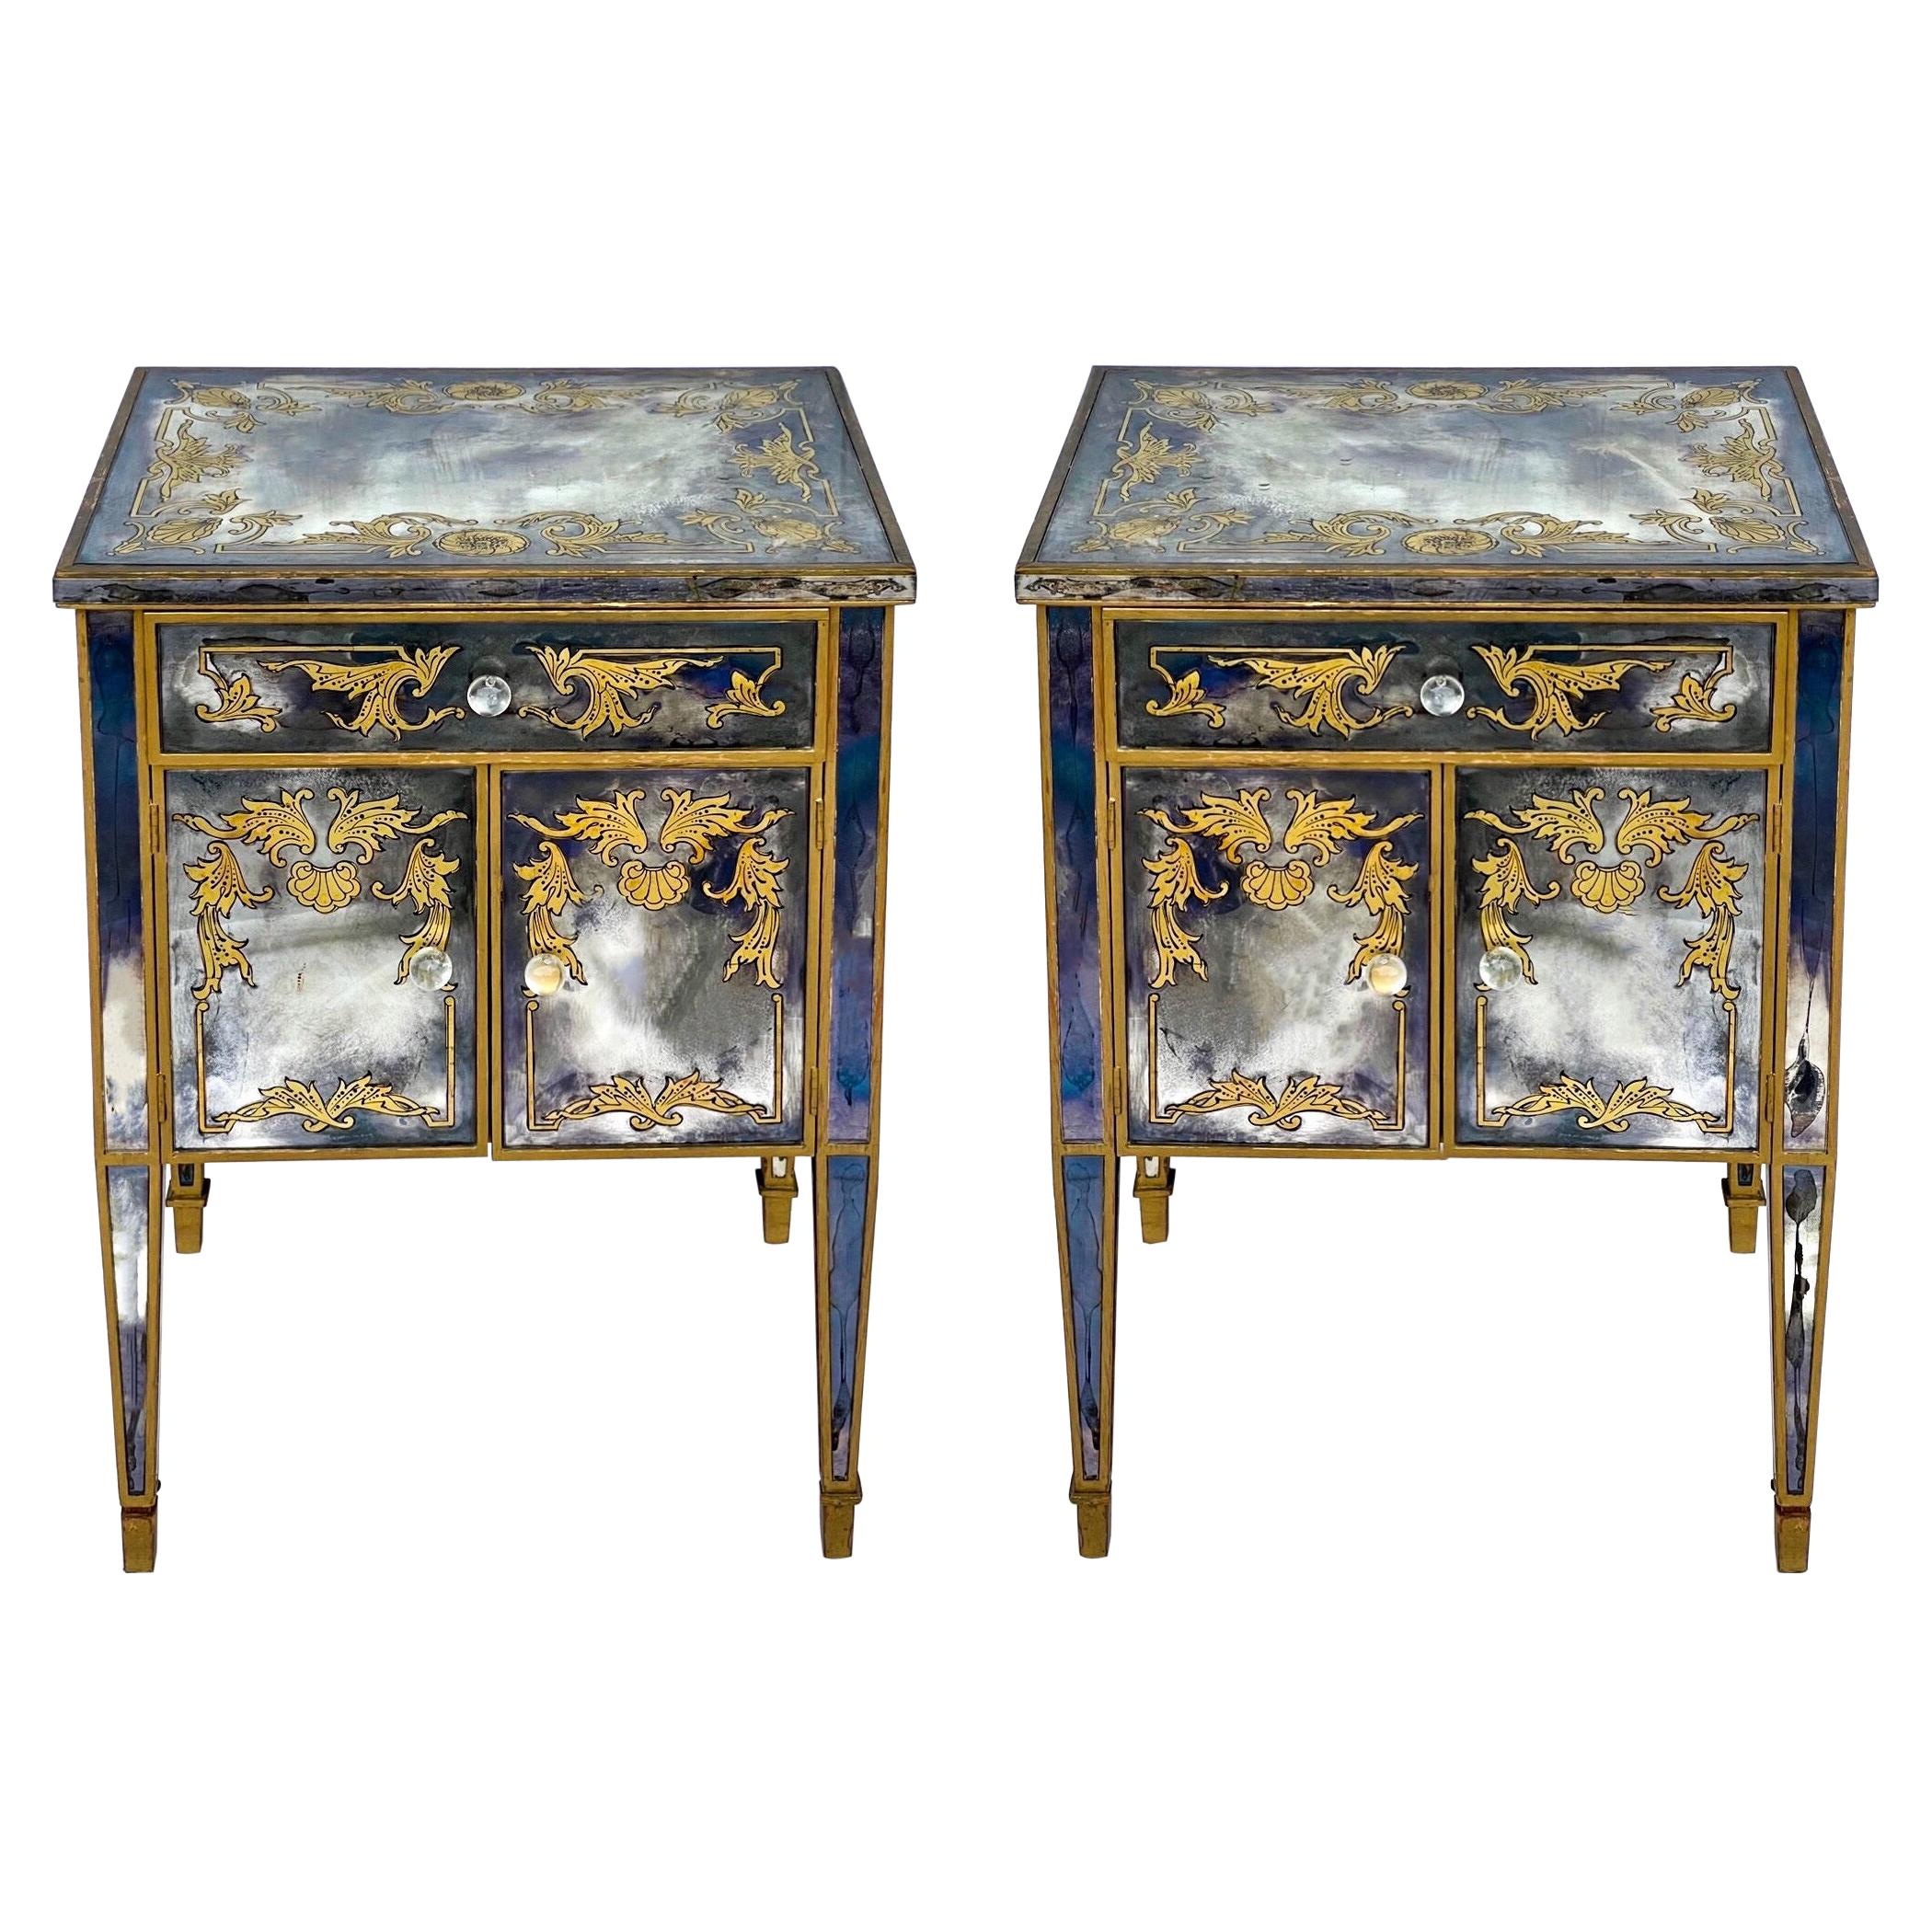 1960s French Englomise Mirrored Chests / Side Tables Att. Maison Jansen, Pair